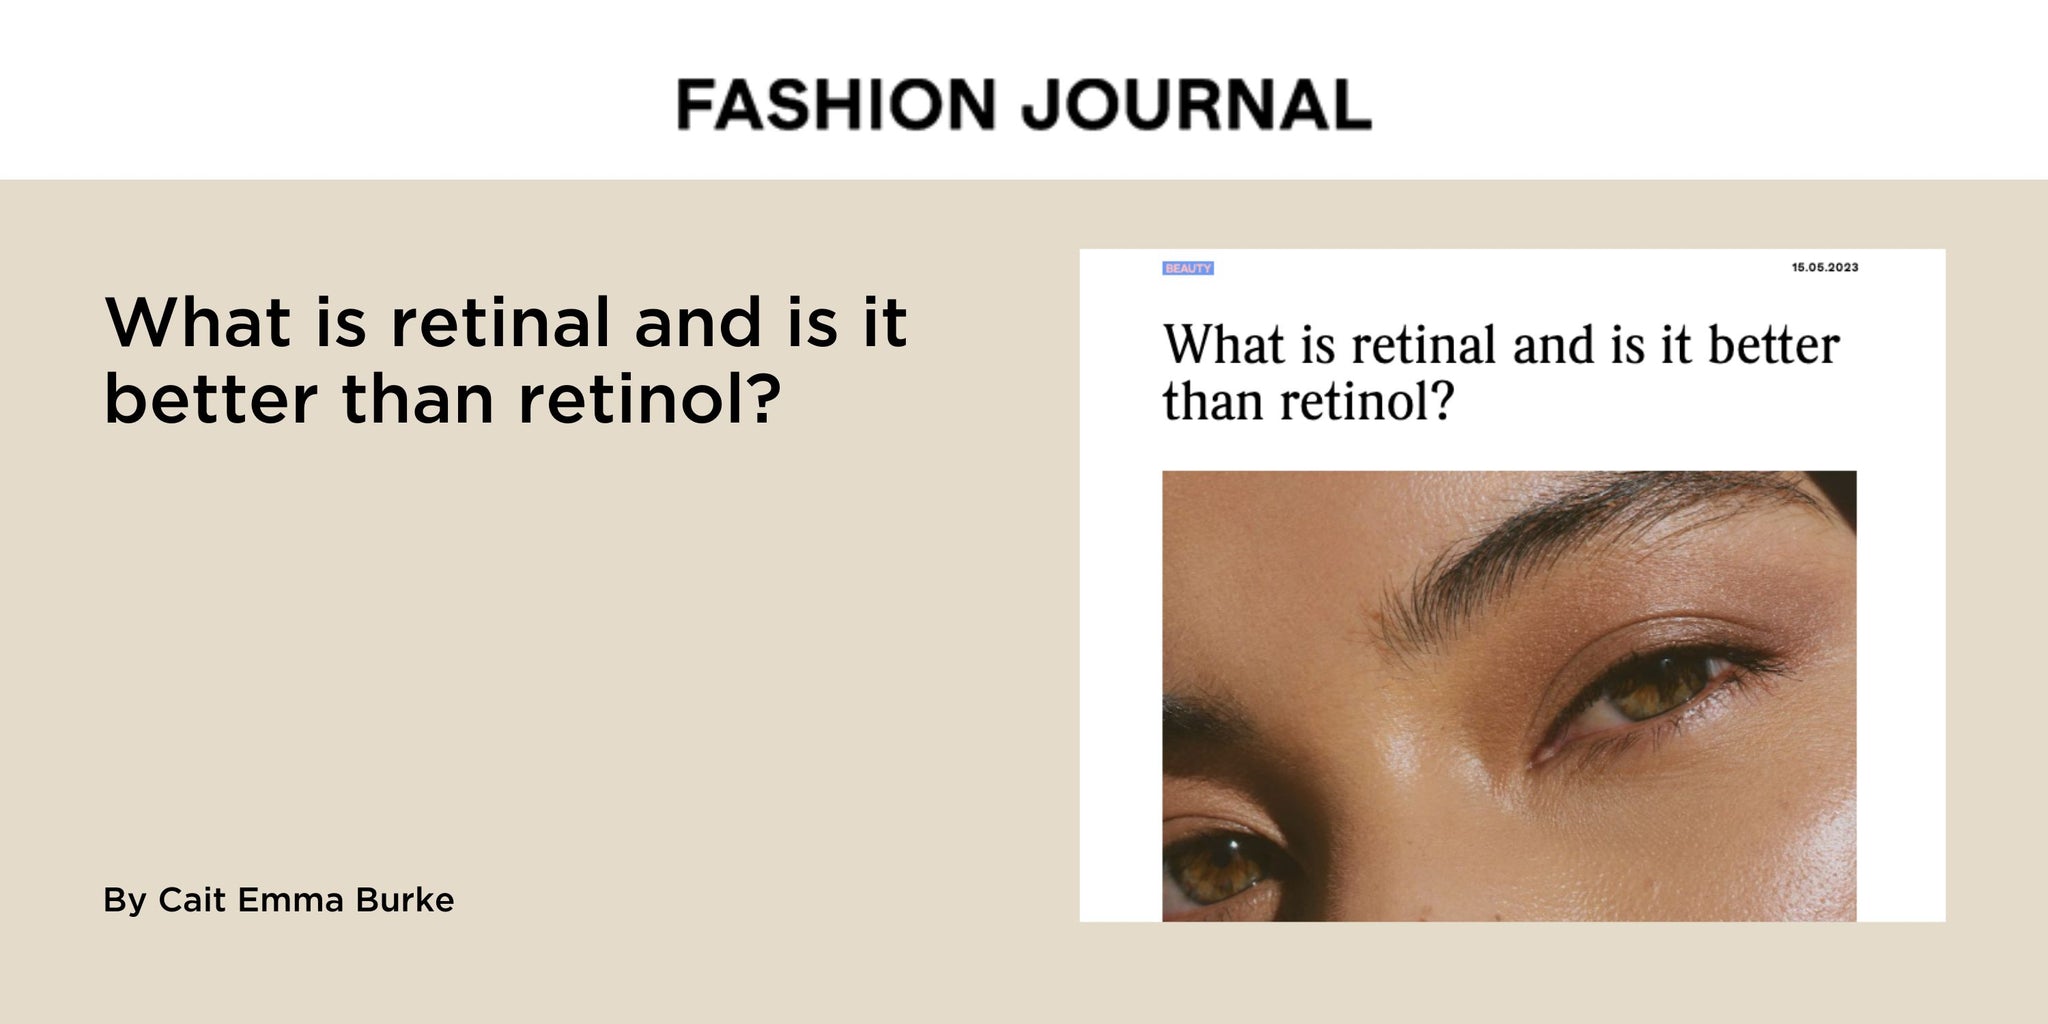 What is retinal and is it better than retinol?